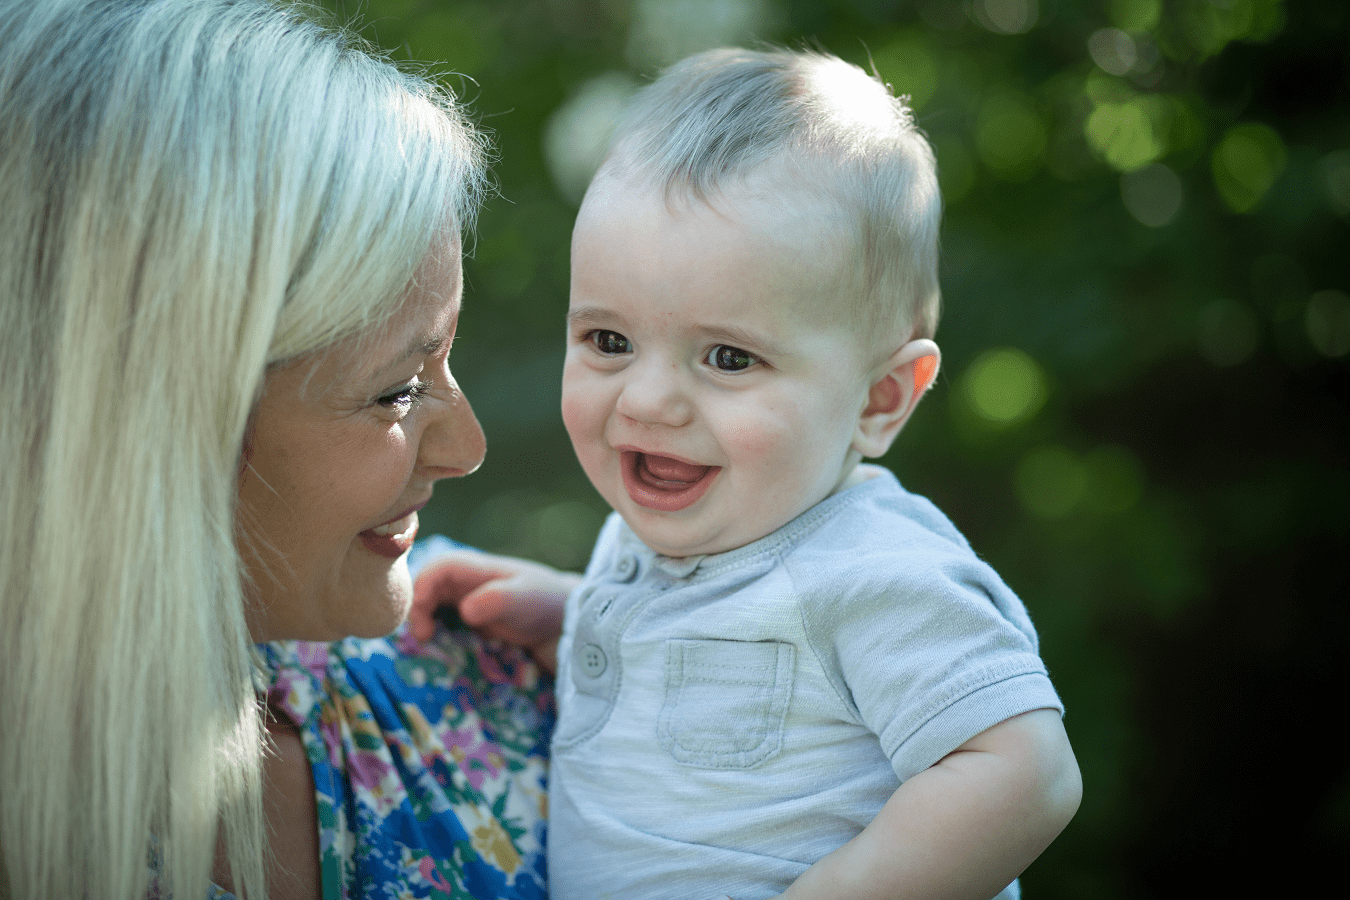 A young, blond mom smiles at her young baby, who she is holding.